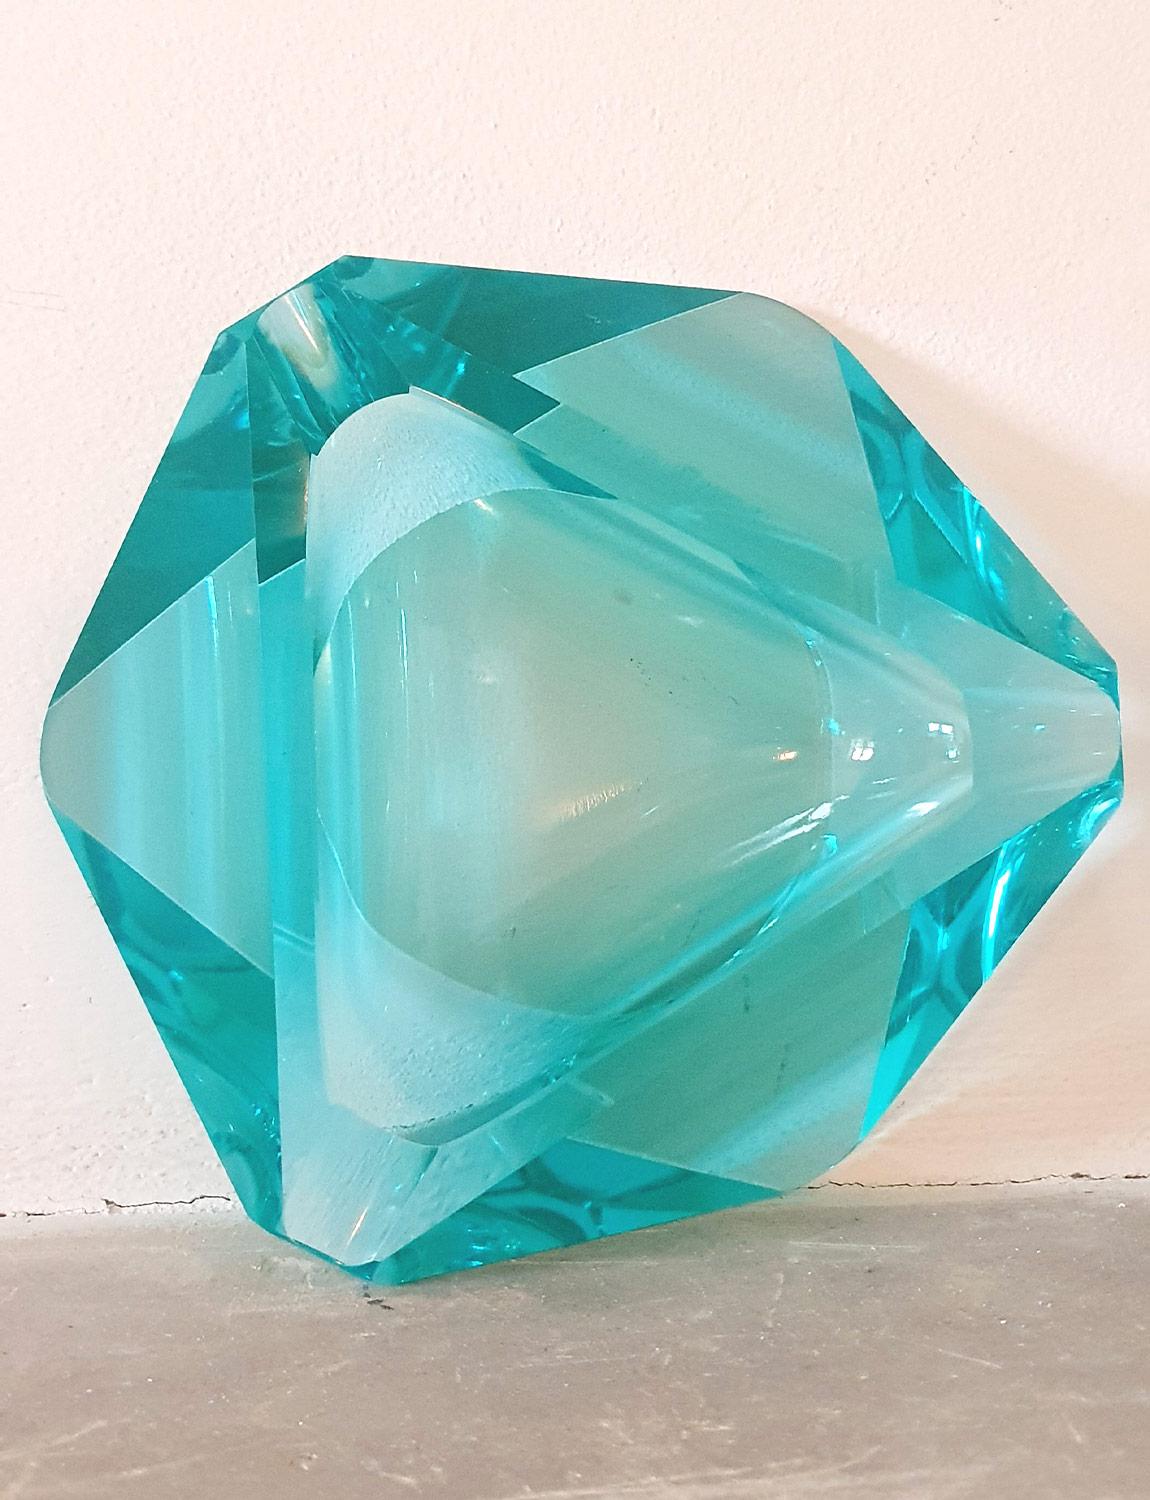 An exceptional Turquoise geometric bowl by Max Ingrand for Fontana Arte. Fontana Arte was the design house co-founded by Gio Ponti in Milan in the 1930s. These rare original pieces are now exceptional collectors items. Made in the 1960s, these